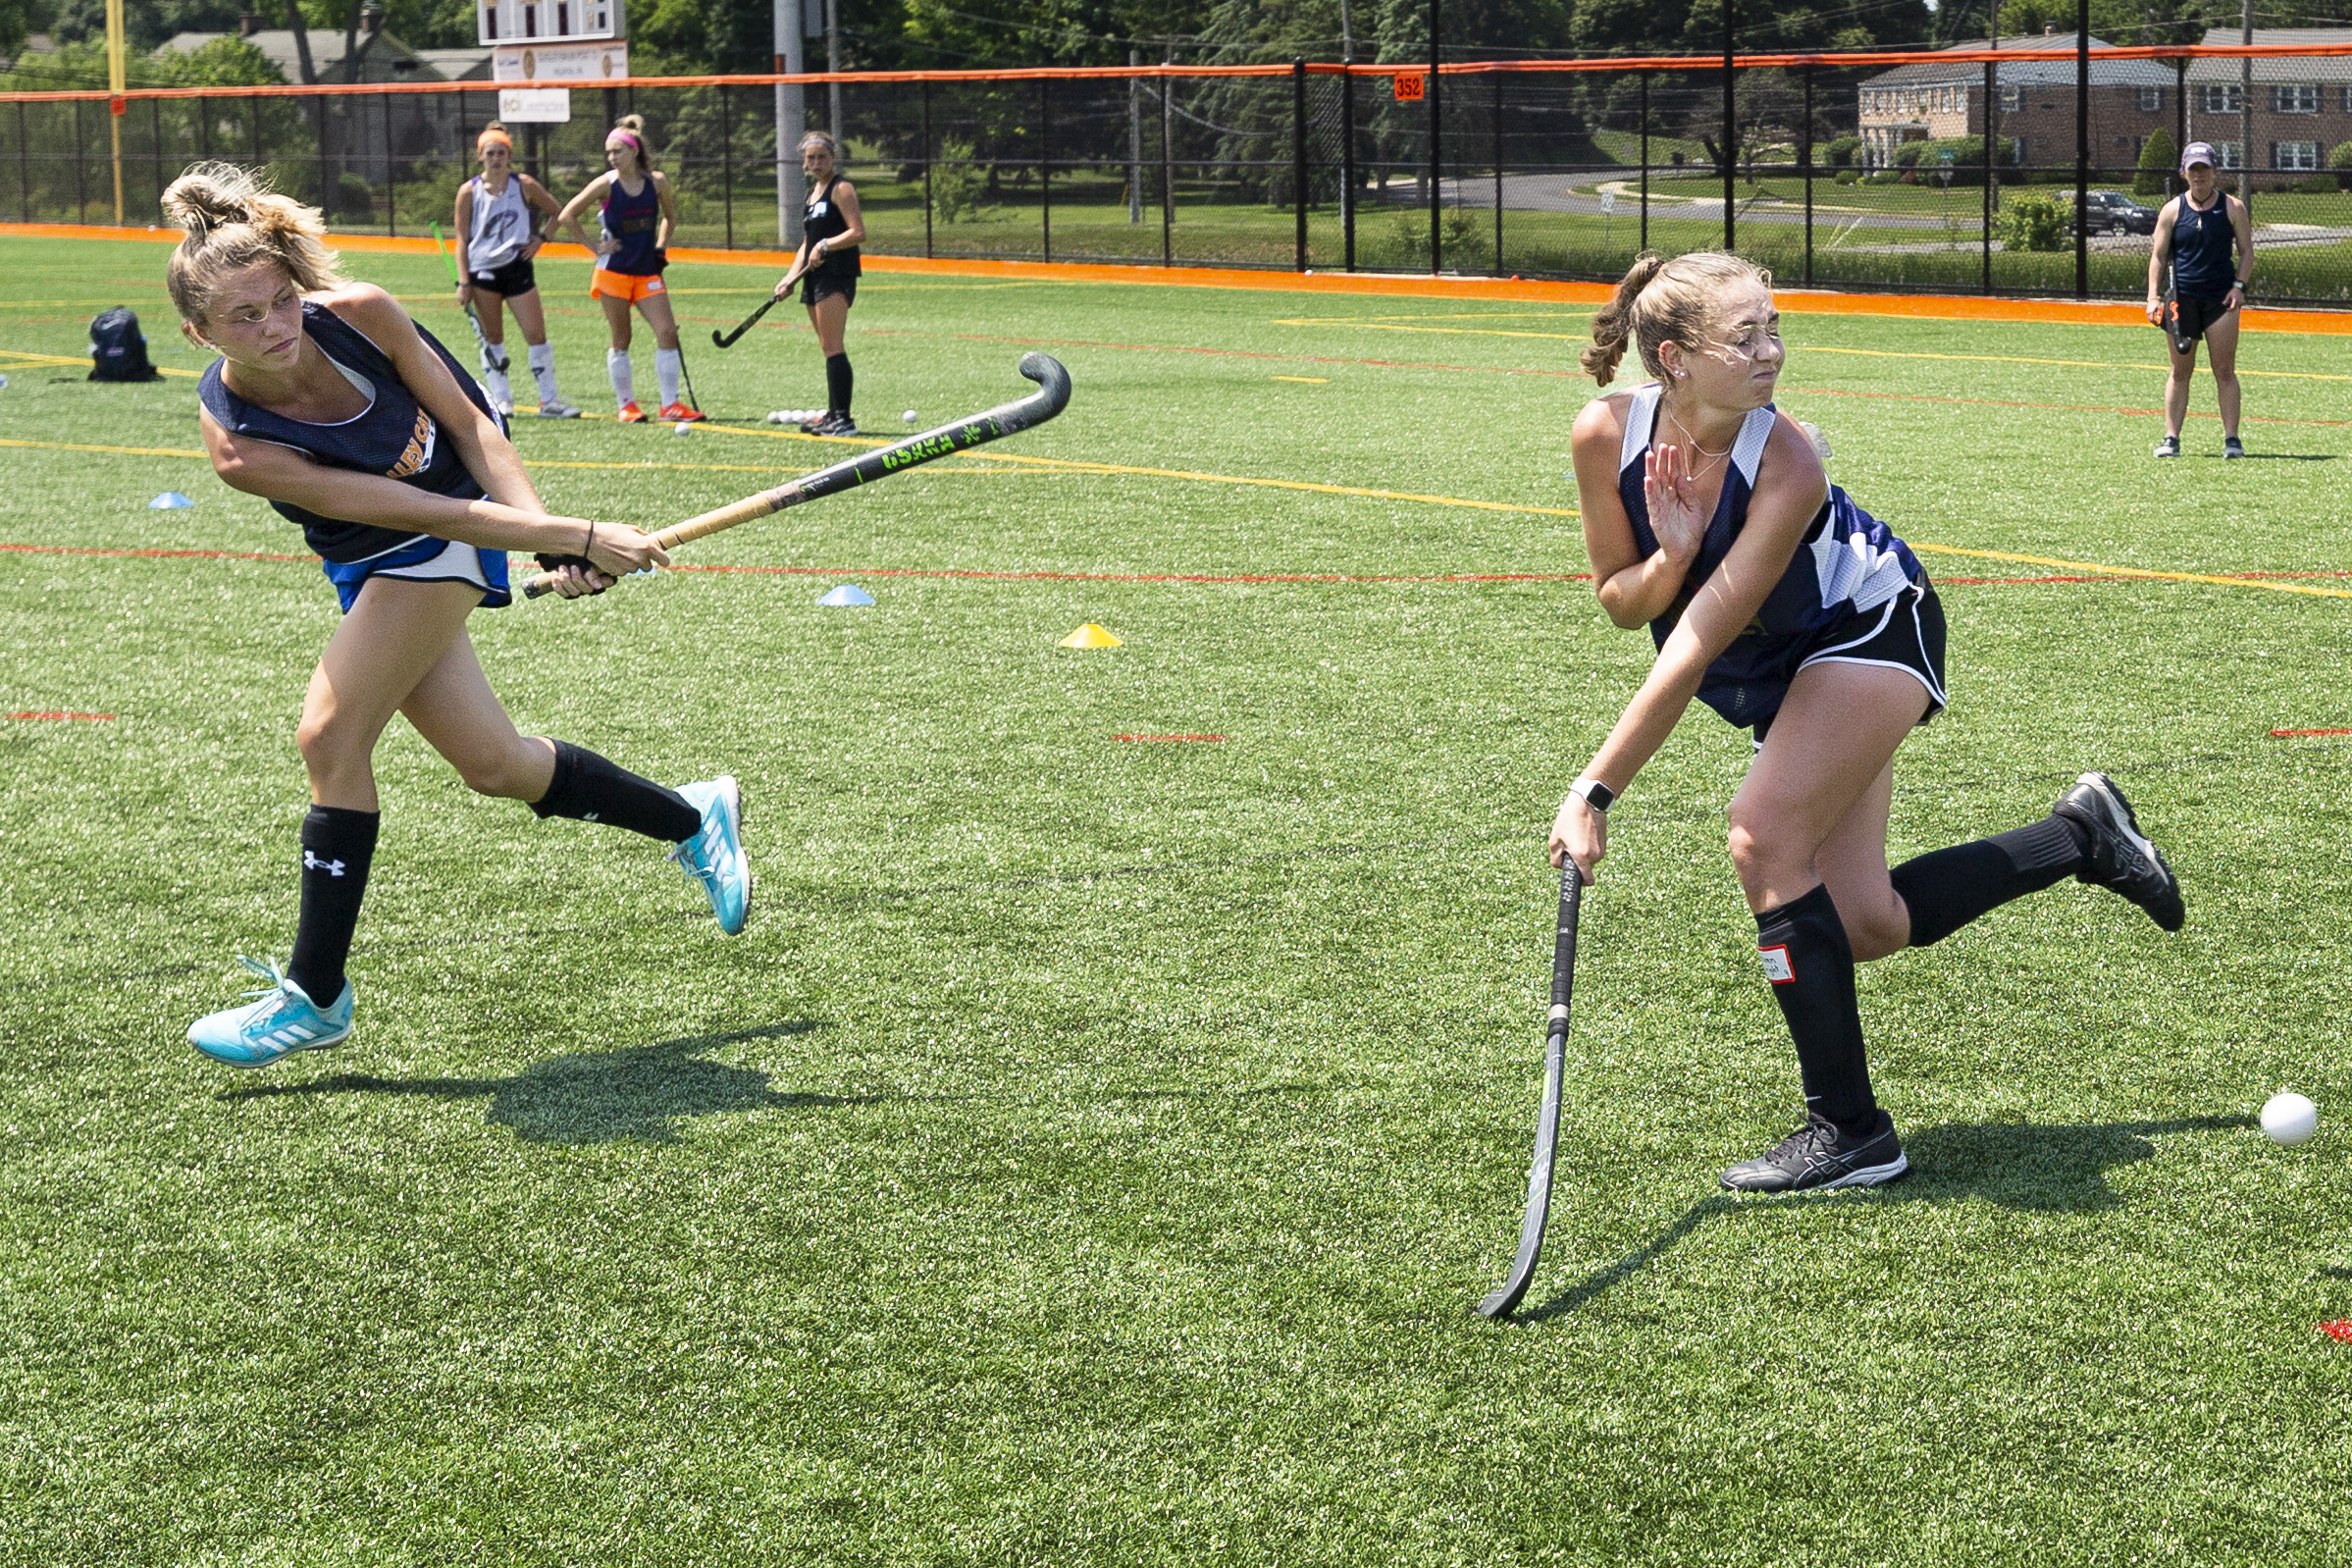 LVHN and Collegiate Field Hockey Players Host Youth Girls' Clinic